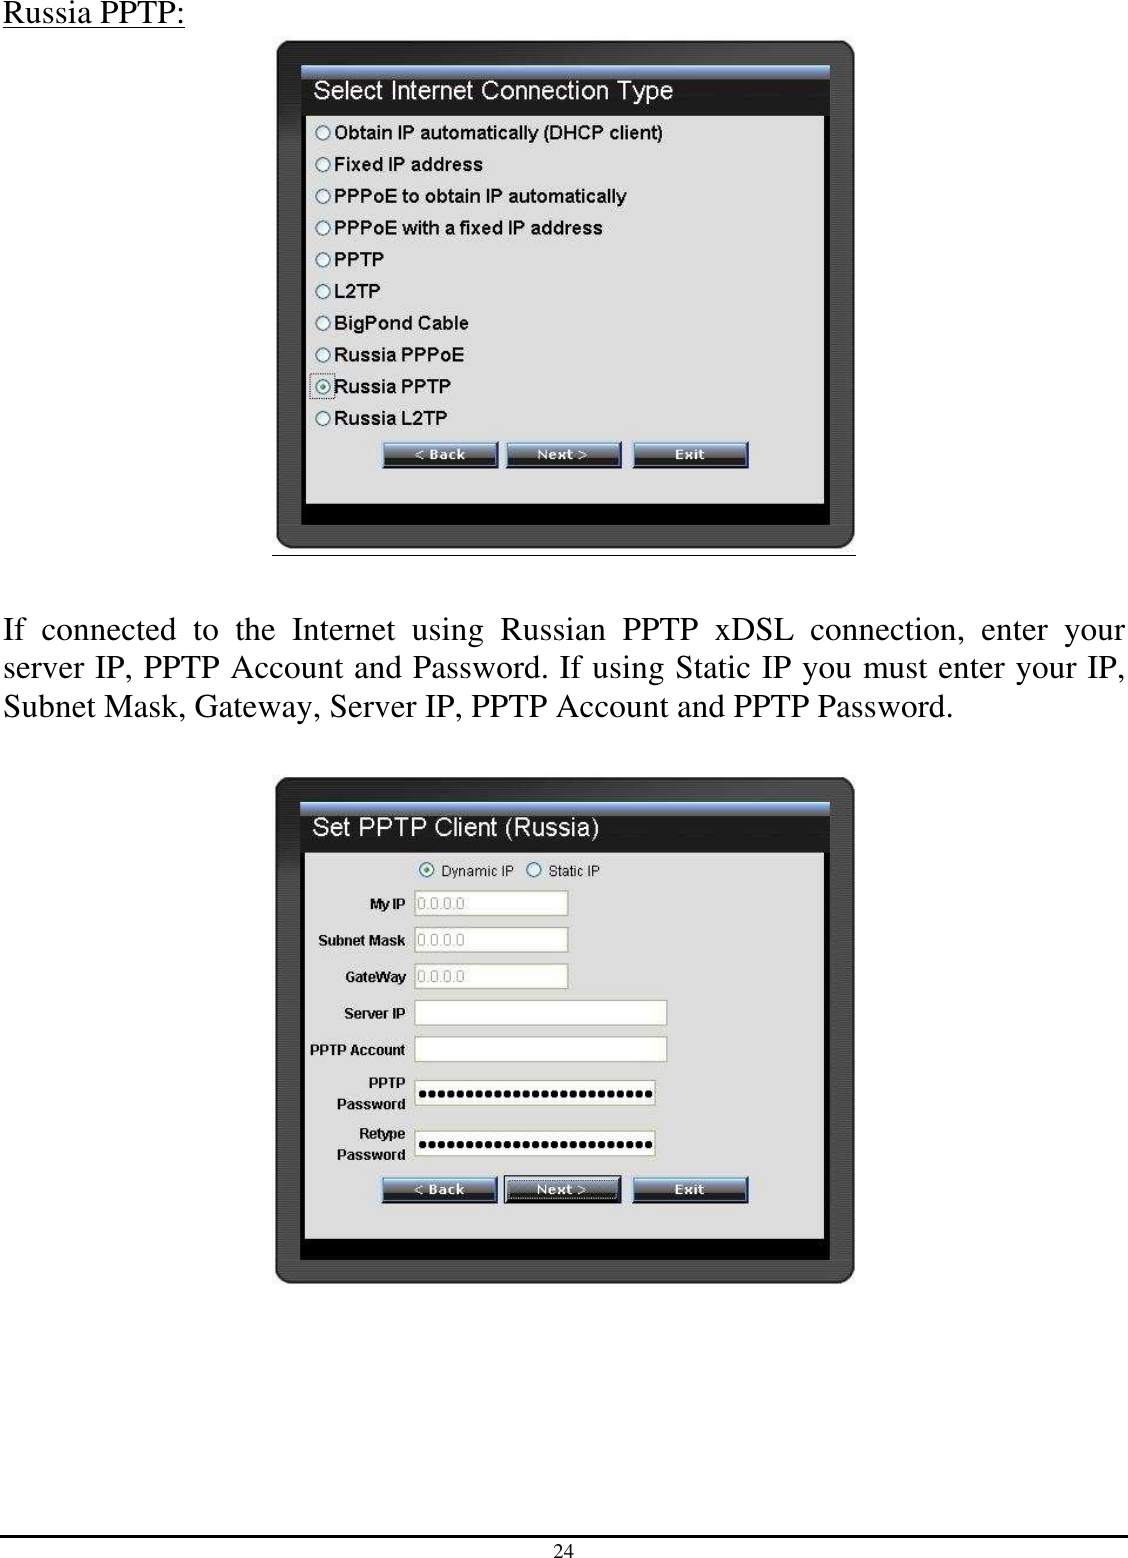 24 Russia PPTP:   If  connected  to  the  Internet  using  Russian  PPTP  xDSL  connection,  enter  your server IP, PPTP Account and Password. If using Static IP you must enter your IP, Subnet Mask, Gateway, Server IP, PPTP Account and PPTP Password.         